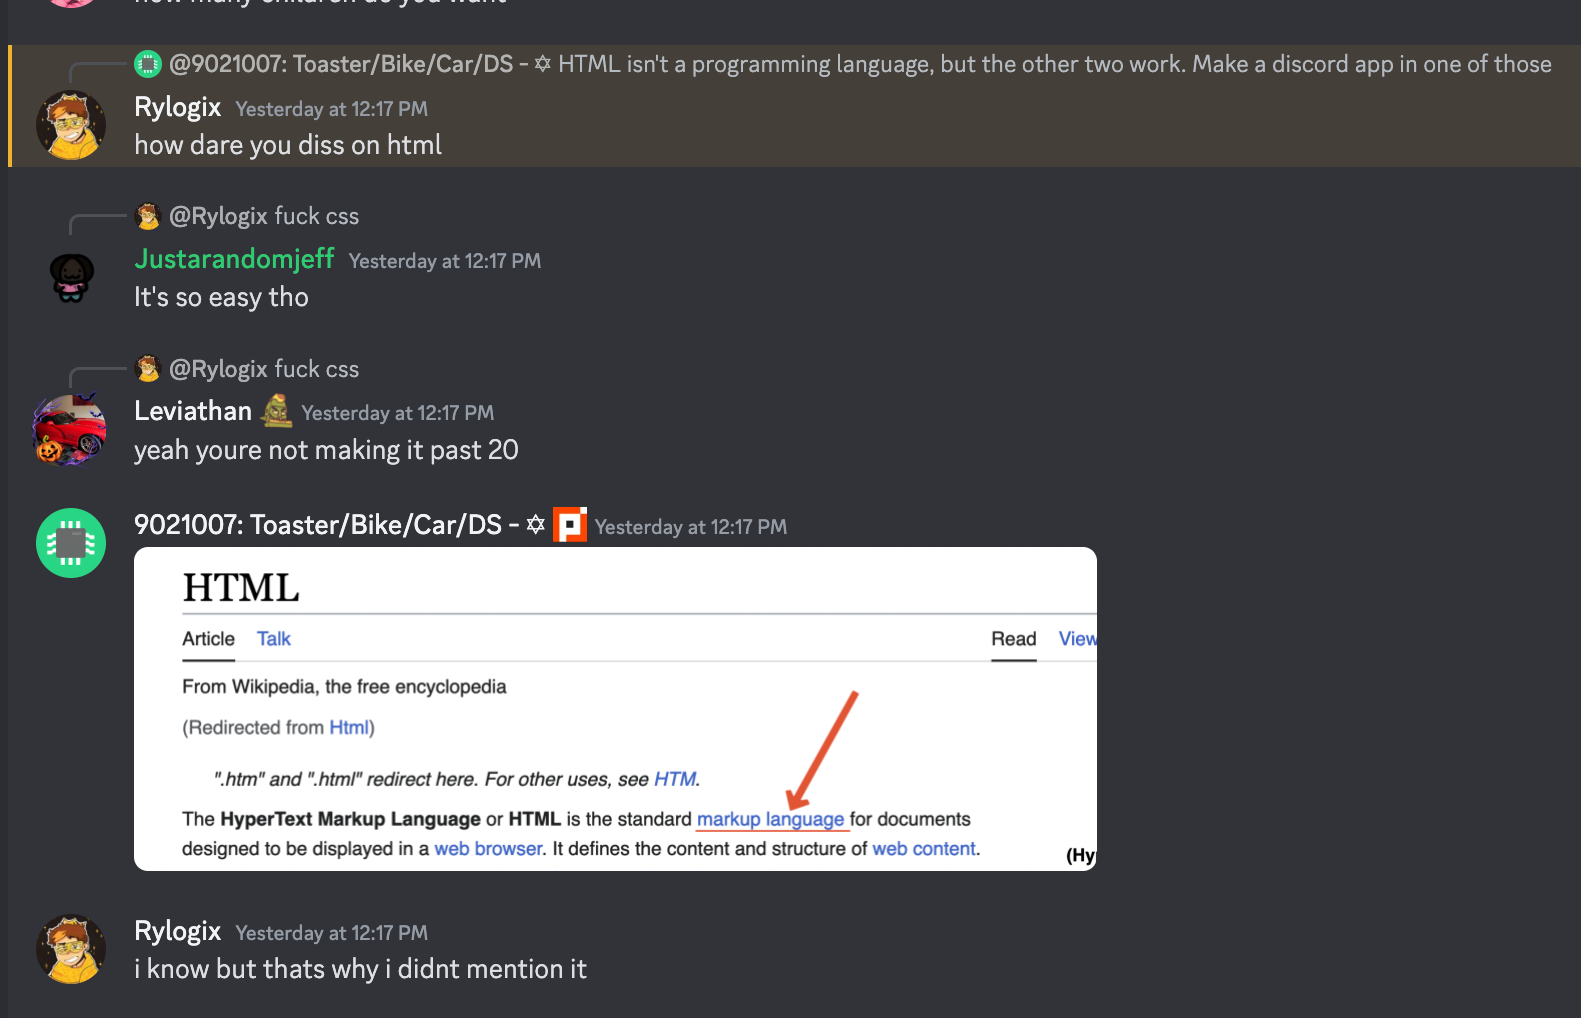 screenshot of discord messages, where just below saying he knew HTML as a programming language, the person said they didn't mention it